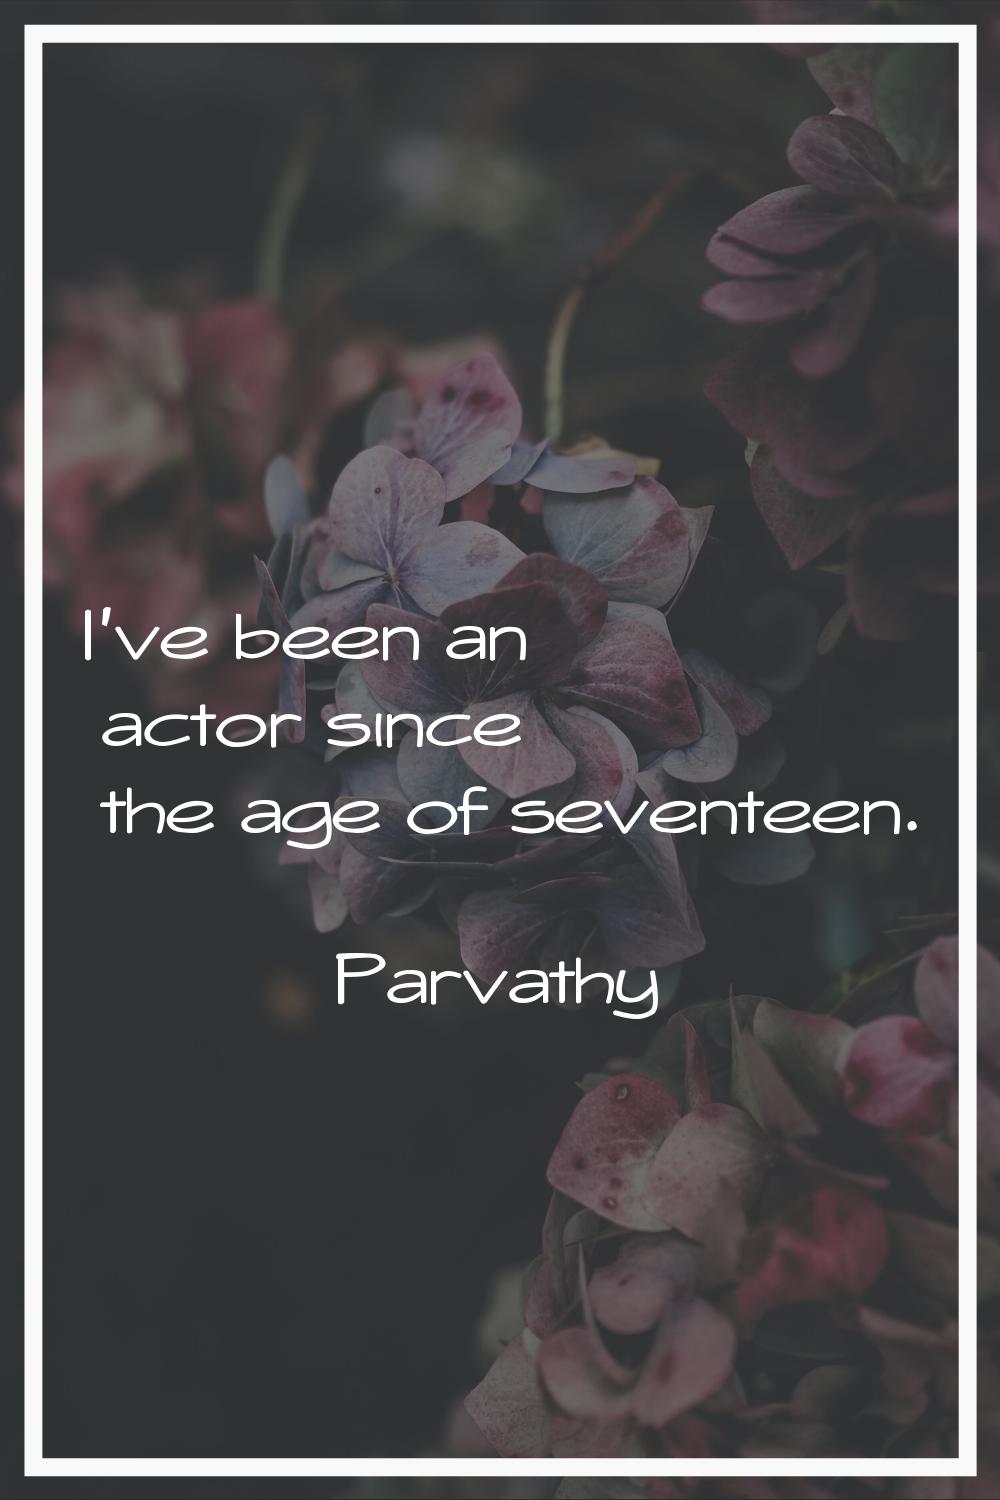 I've been an actor since the age of seventeen.